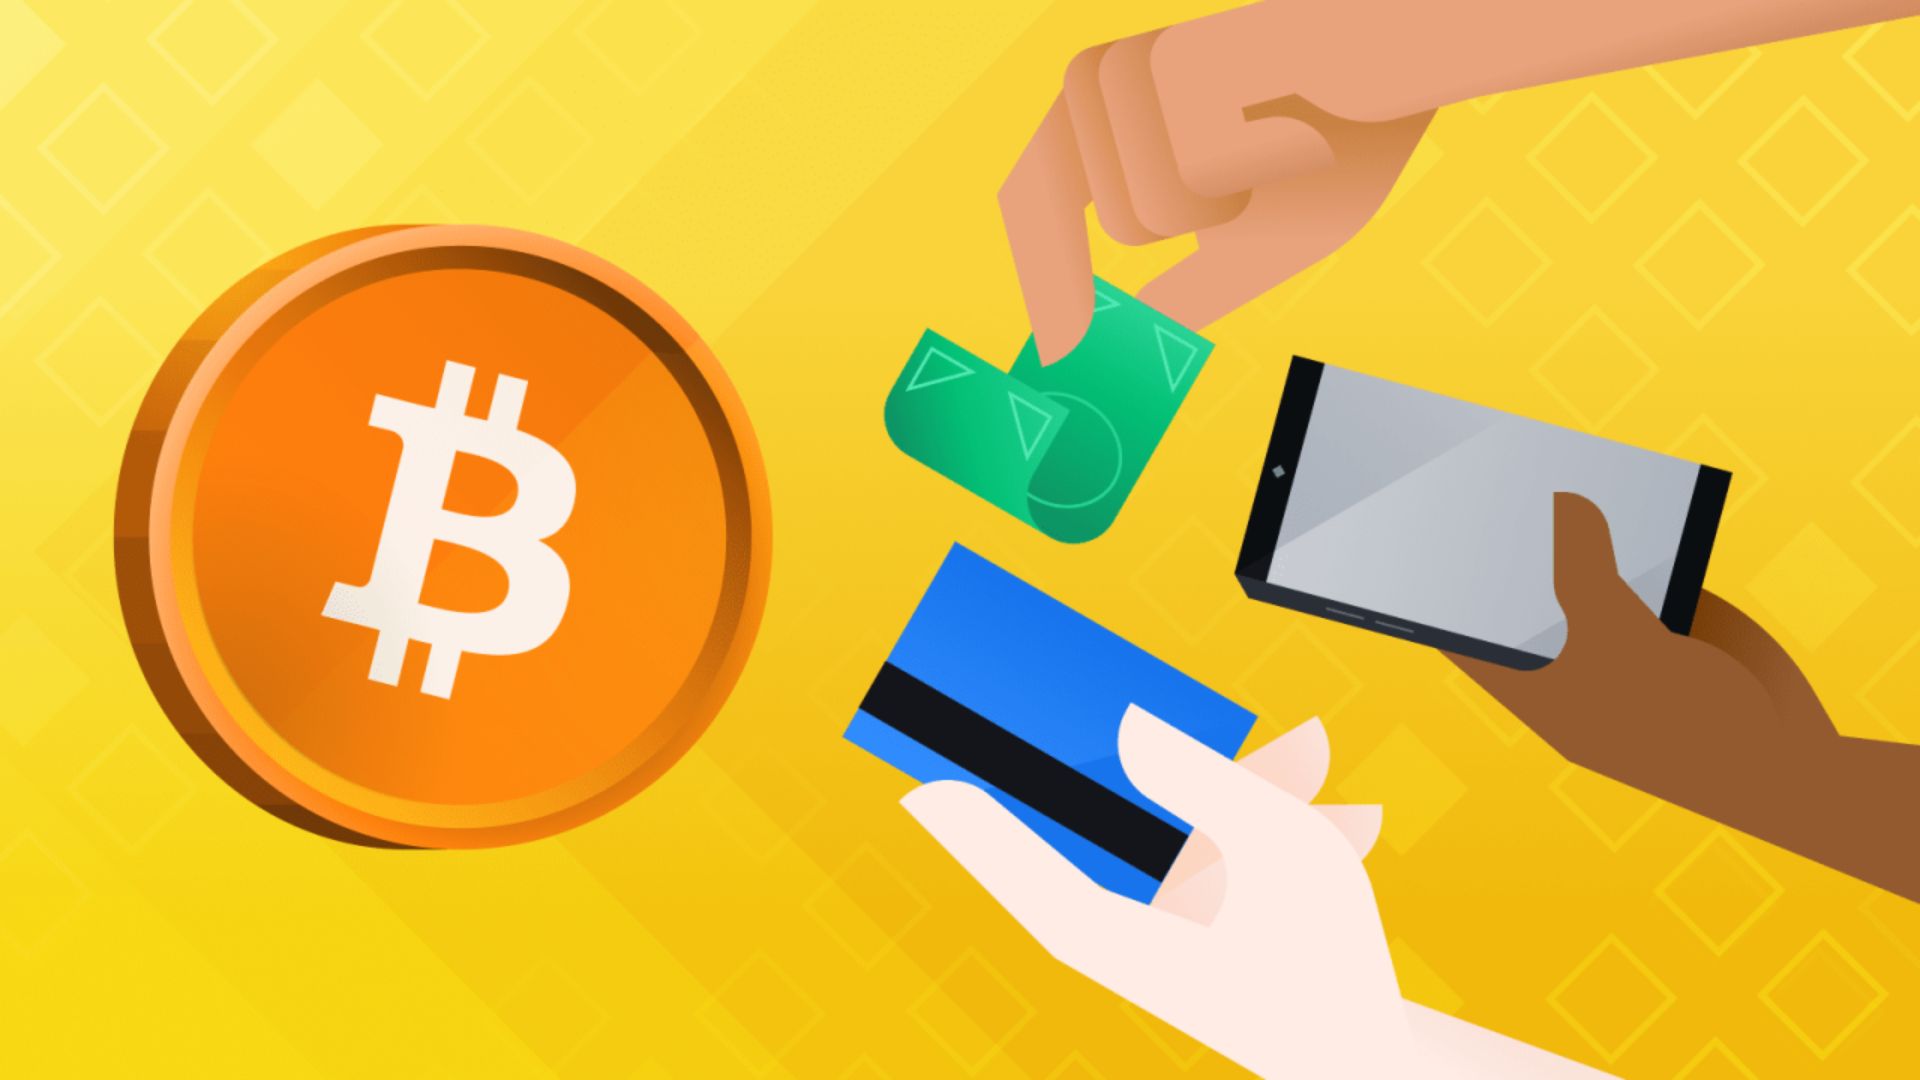 How to Buy Bitcoin Safely: Step-by-Step Instructions